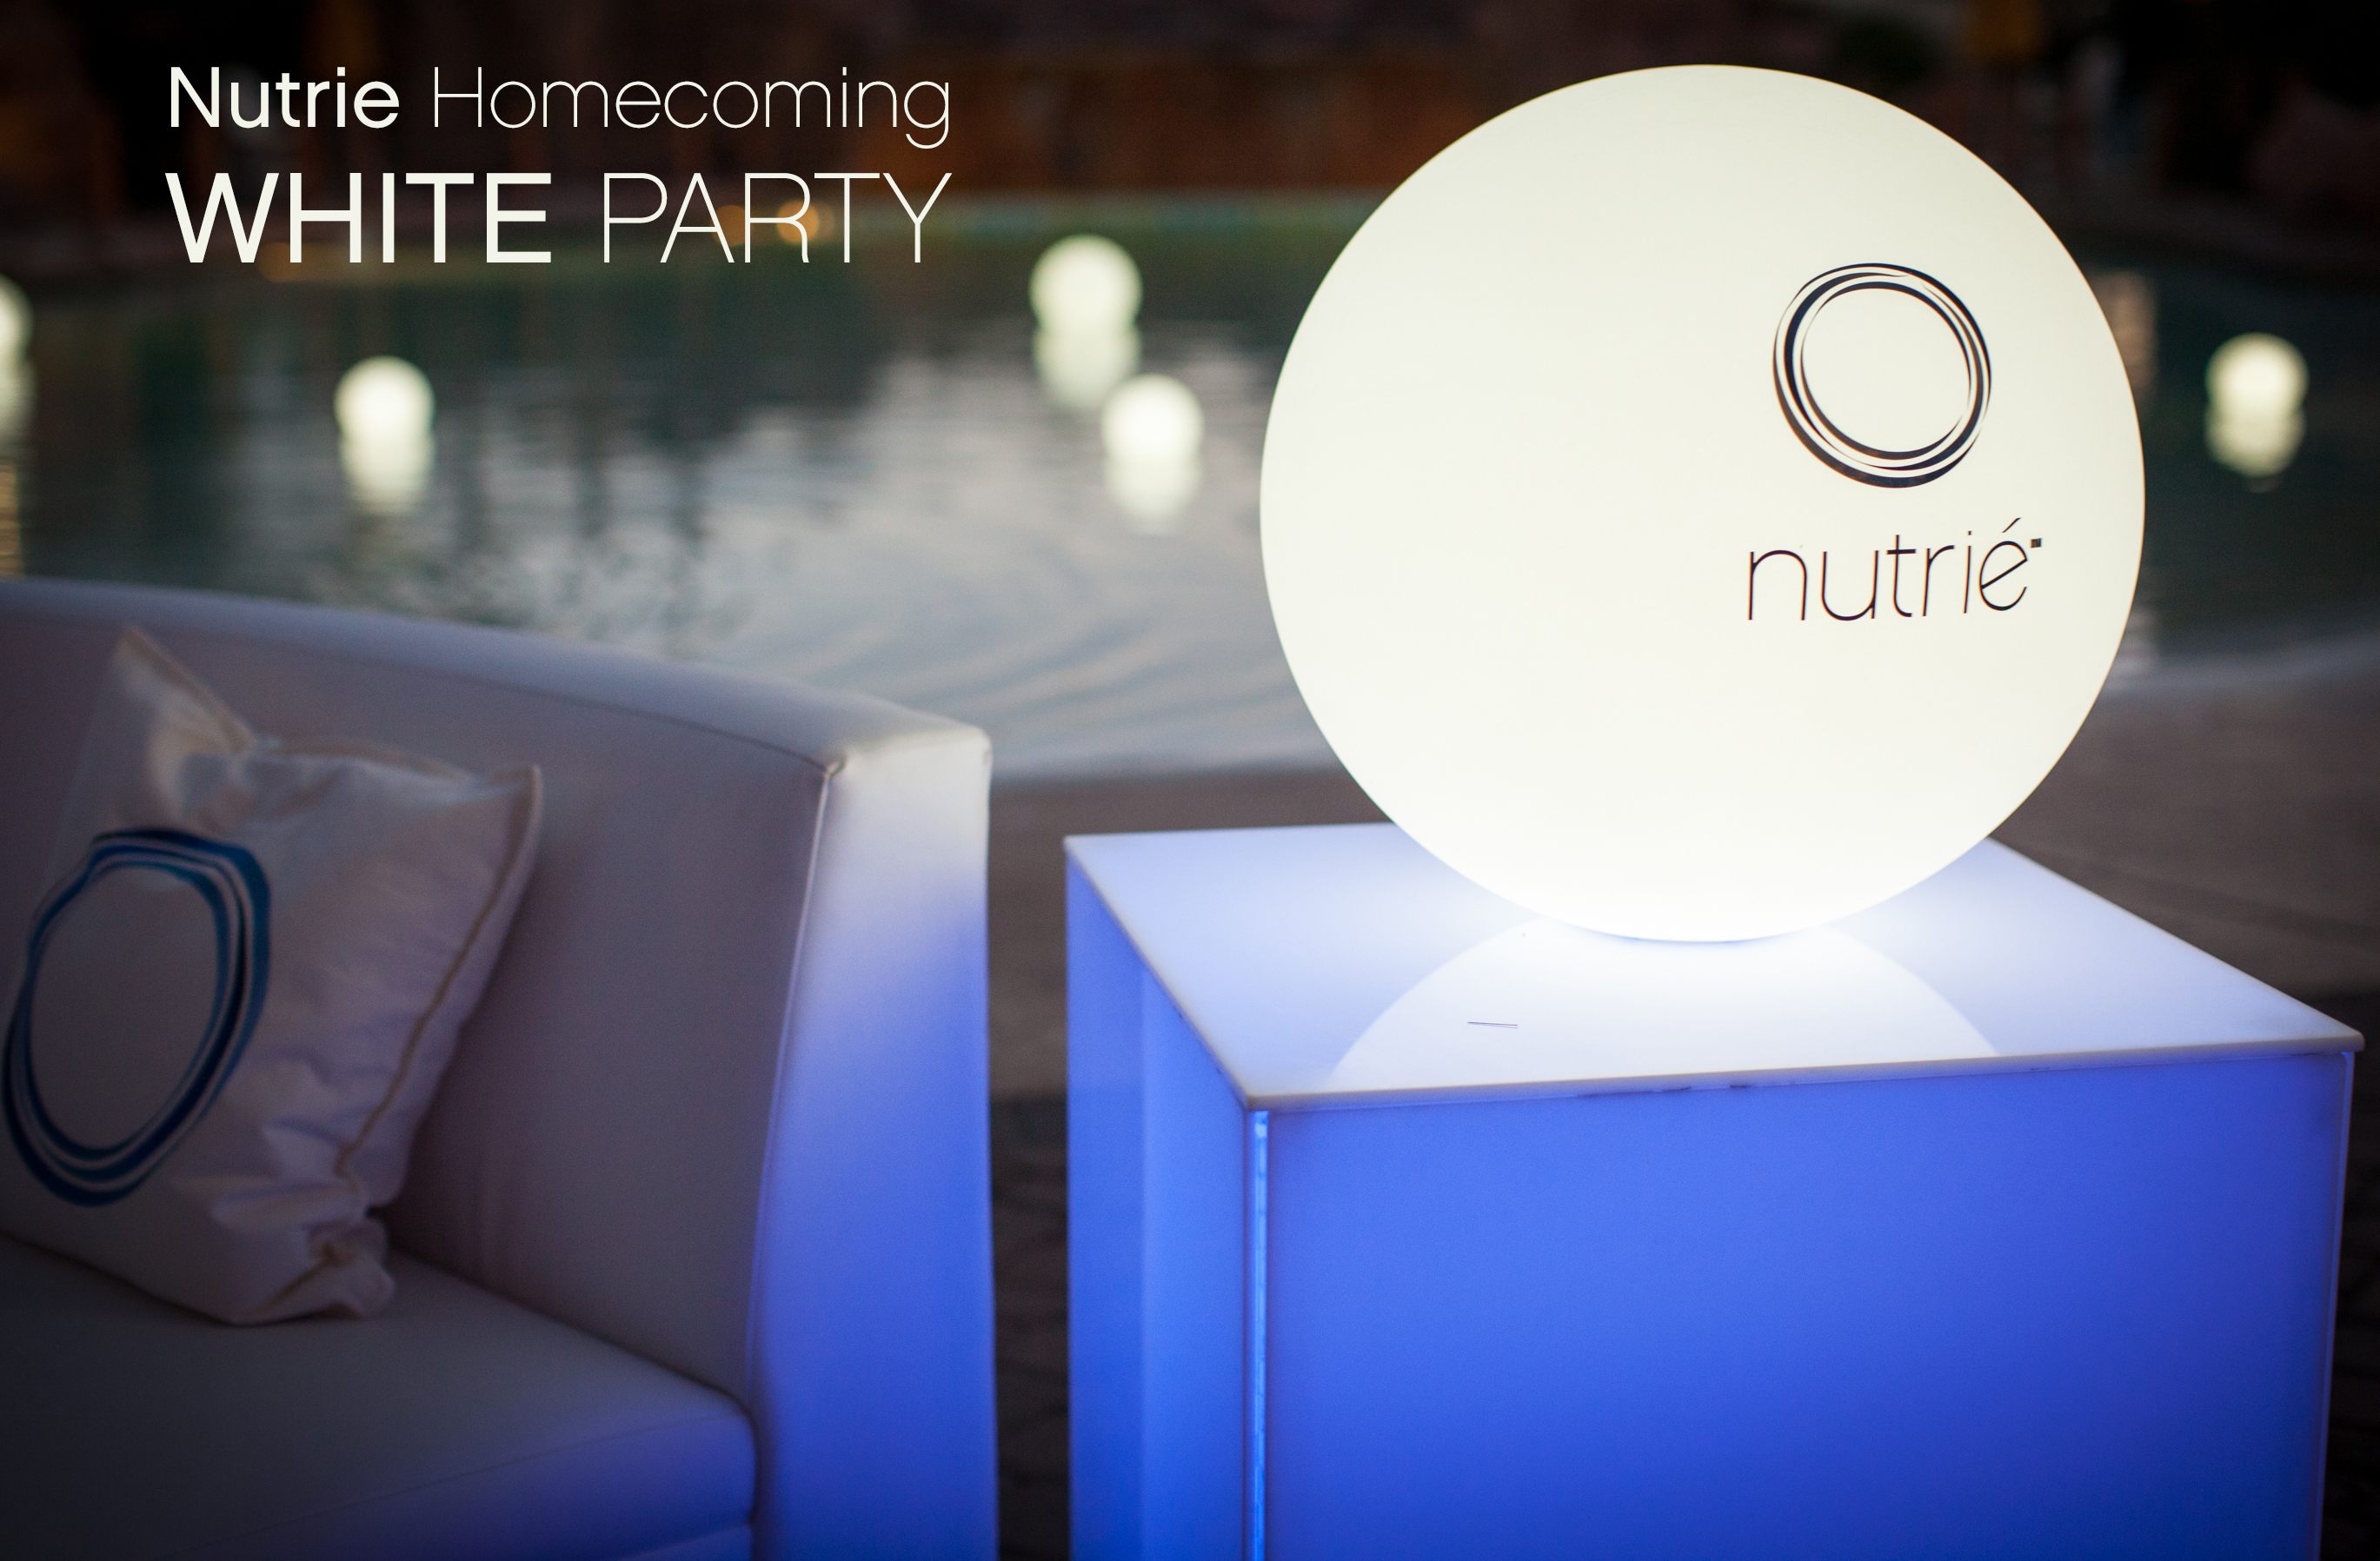 Nutrie Homecoming White Party